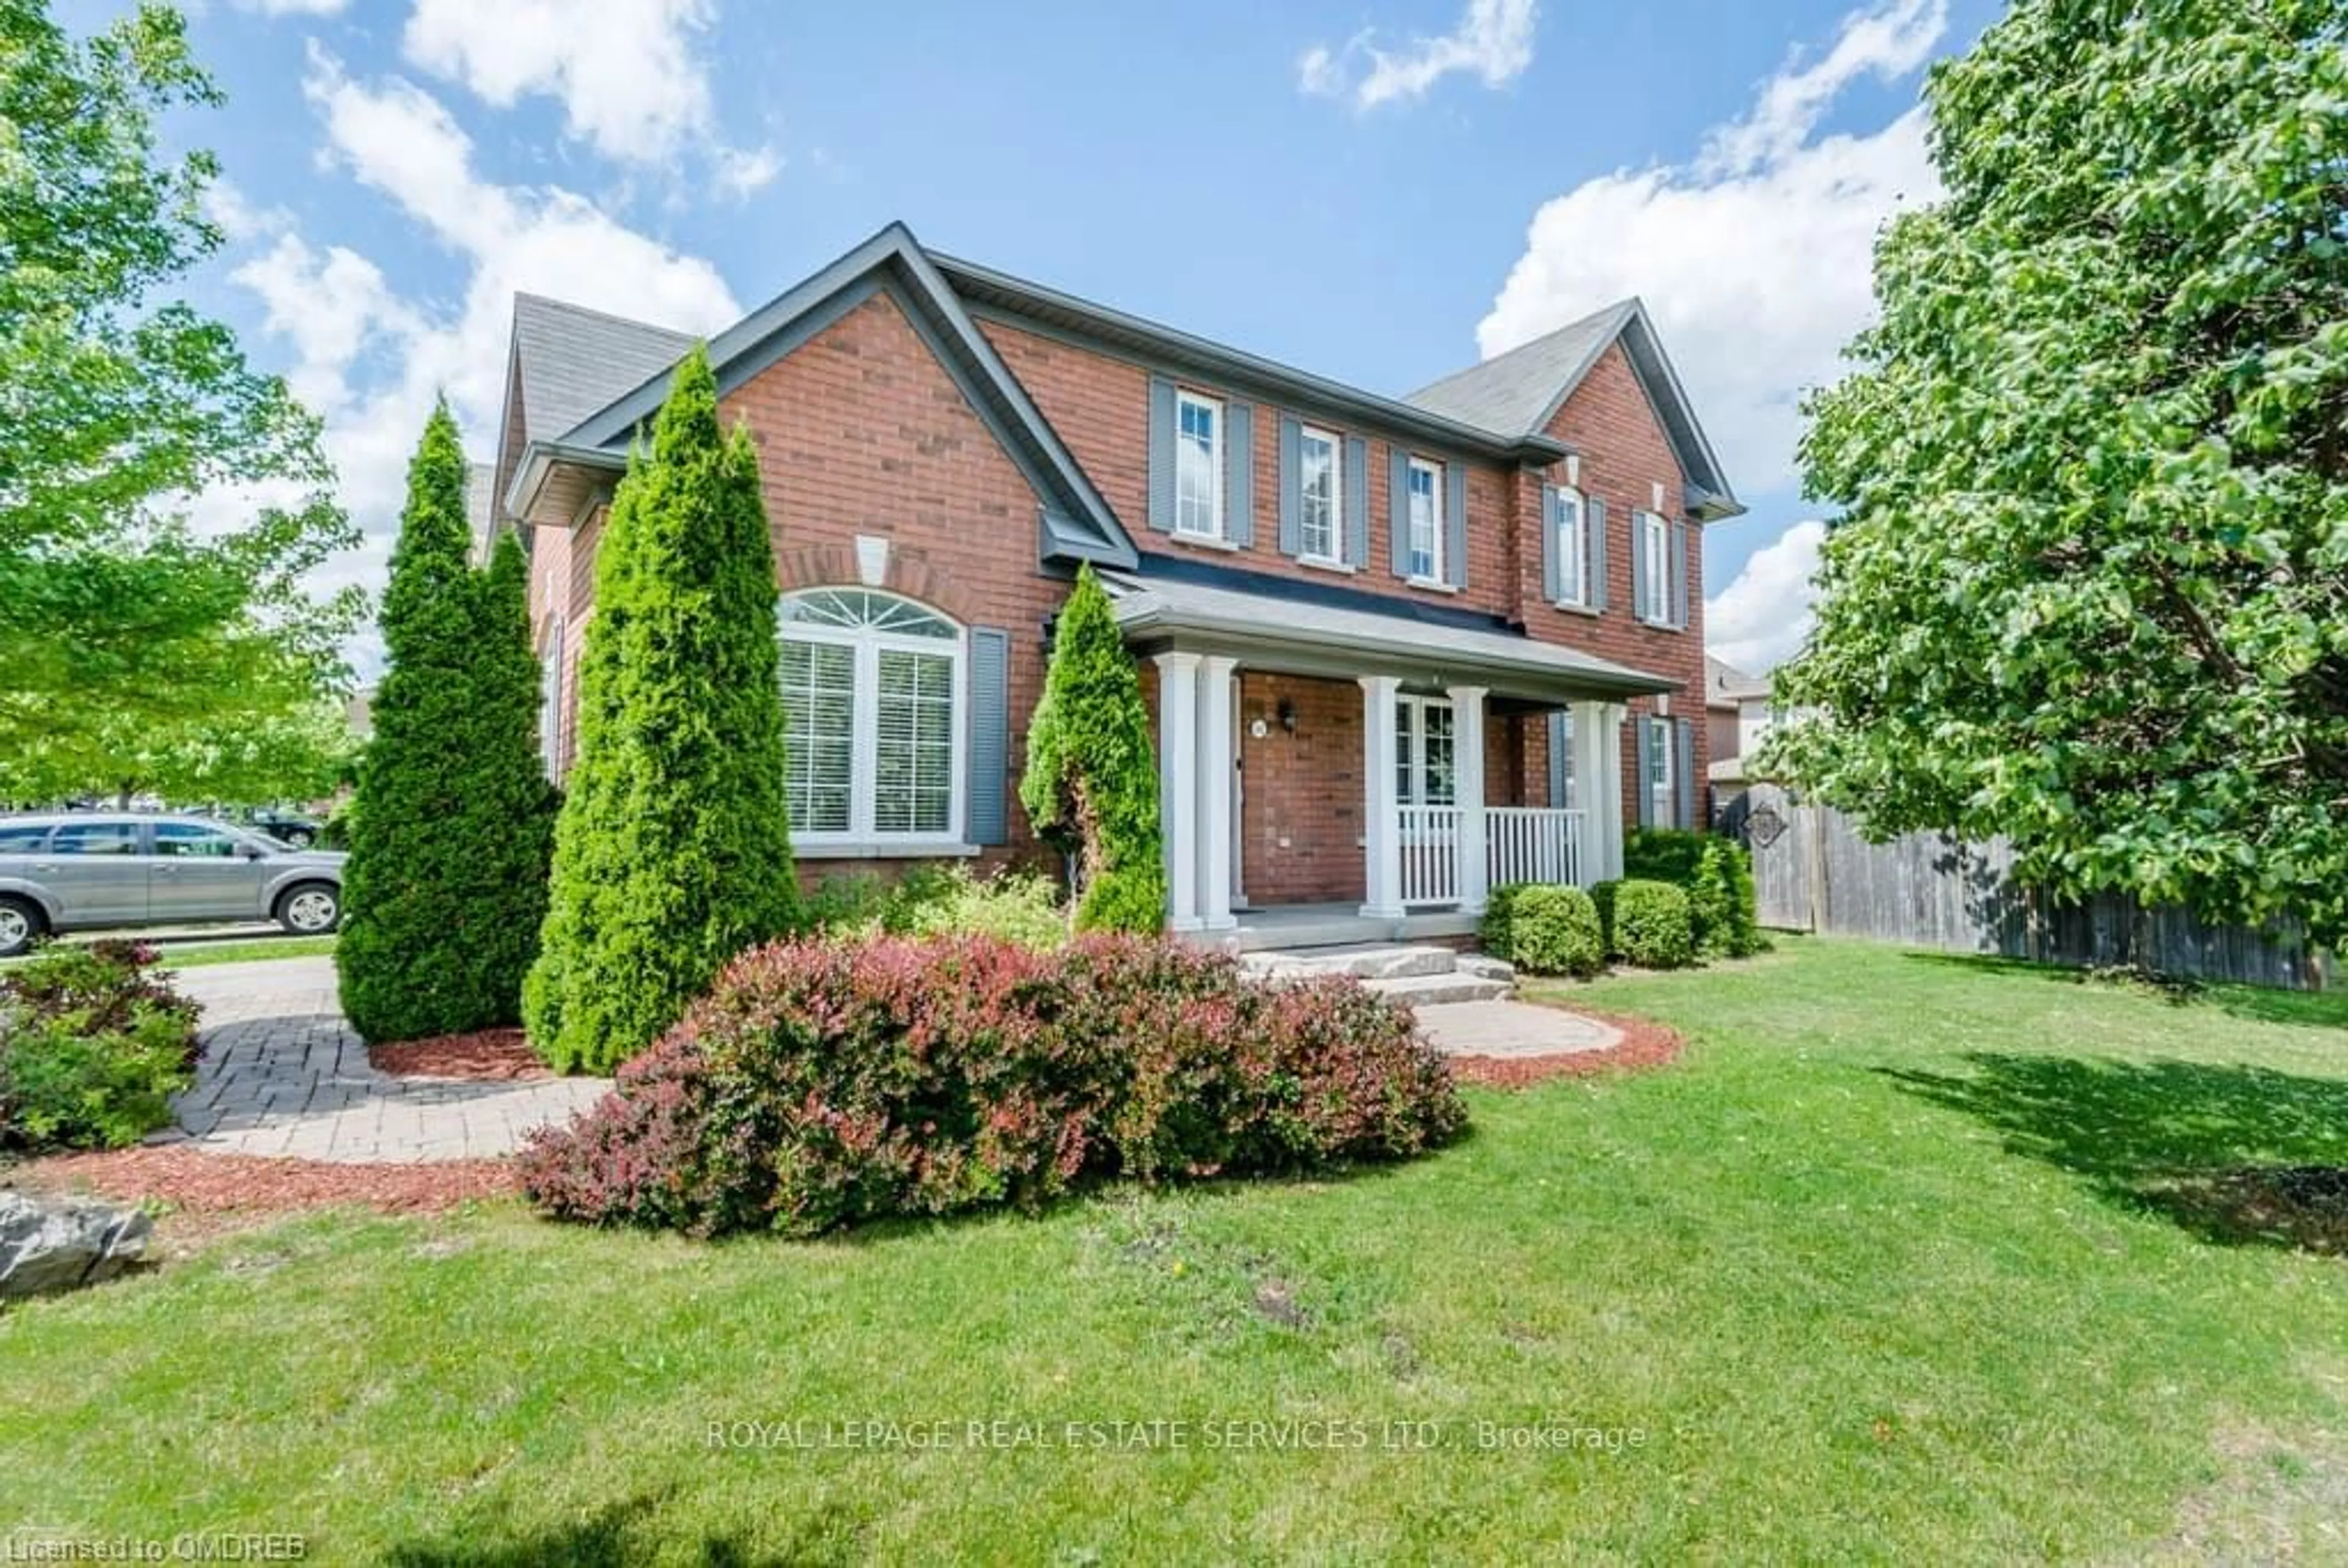 Home with brick exterior material for 2305 Pine Glen Rd, Oakville Ontario L6M 5J2